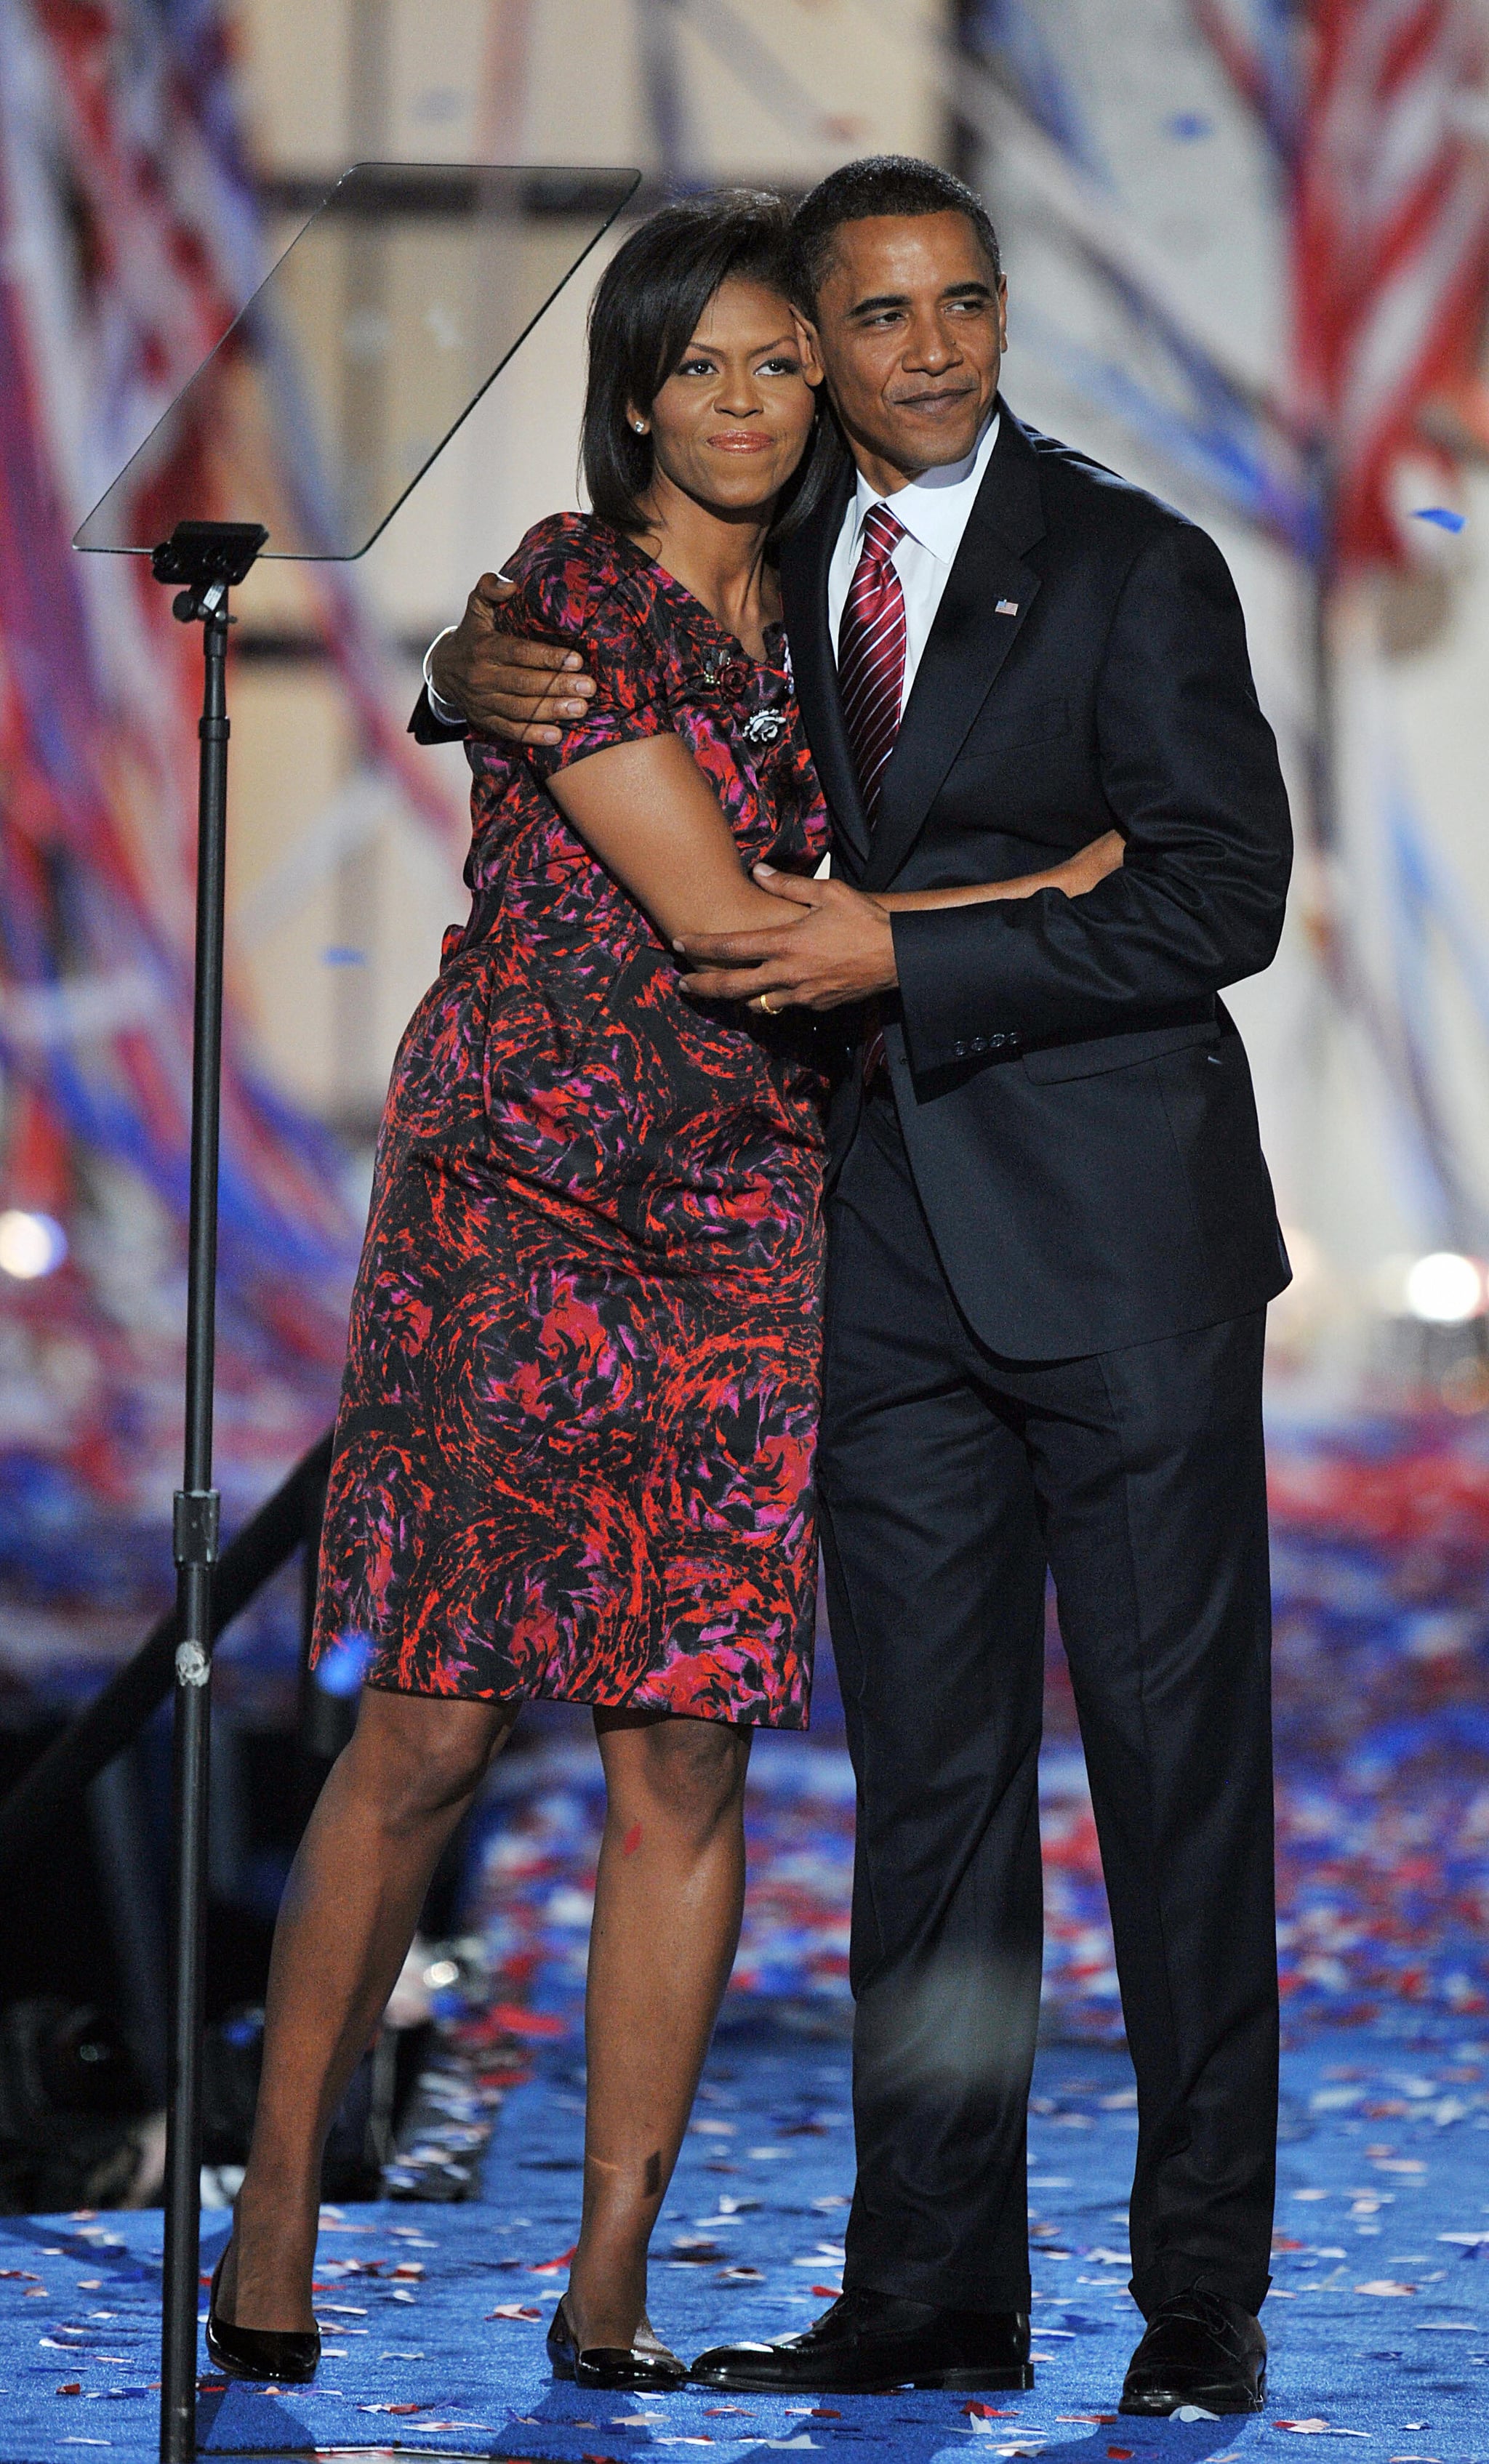 Democratic Presidential candidate Barack Obama hugs his wife Michelle on stage at the end of the Democratic National Convention 2008 at the Invesco Field in Denver, Colorado, on August 28, 2008. The Illinois senator tonight formally accepted his nomination as the first African-American from a major party to run for the White House before more than70,000 people. . AFP PHOTO Paul J. RICHARDS (Photo credit should read PAUL J. RICHARDS/AFP via Getty Images)